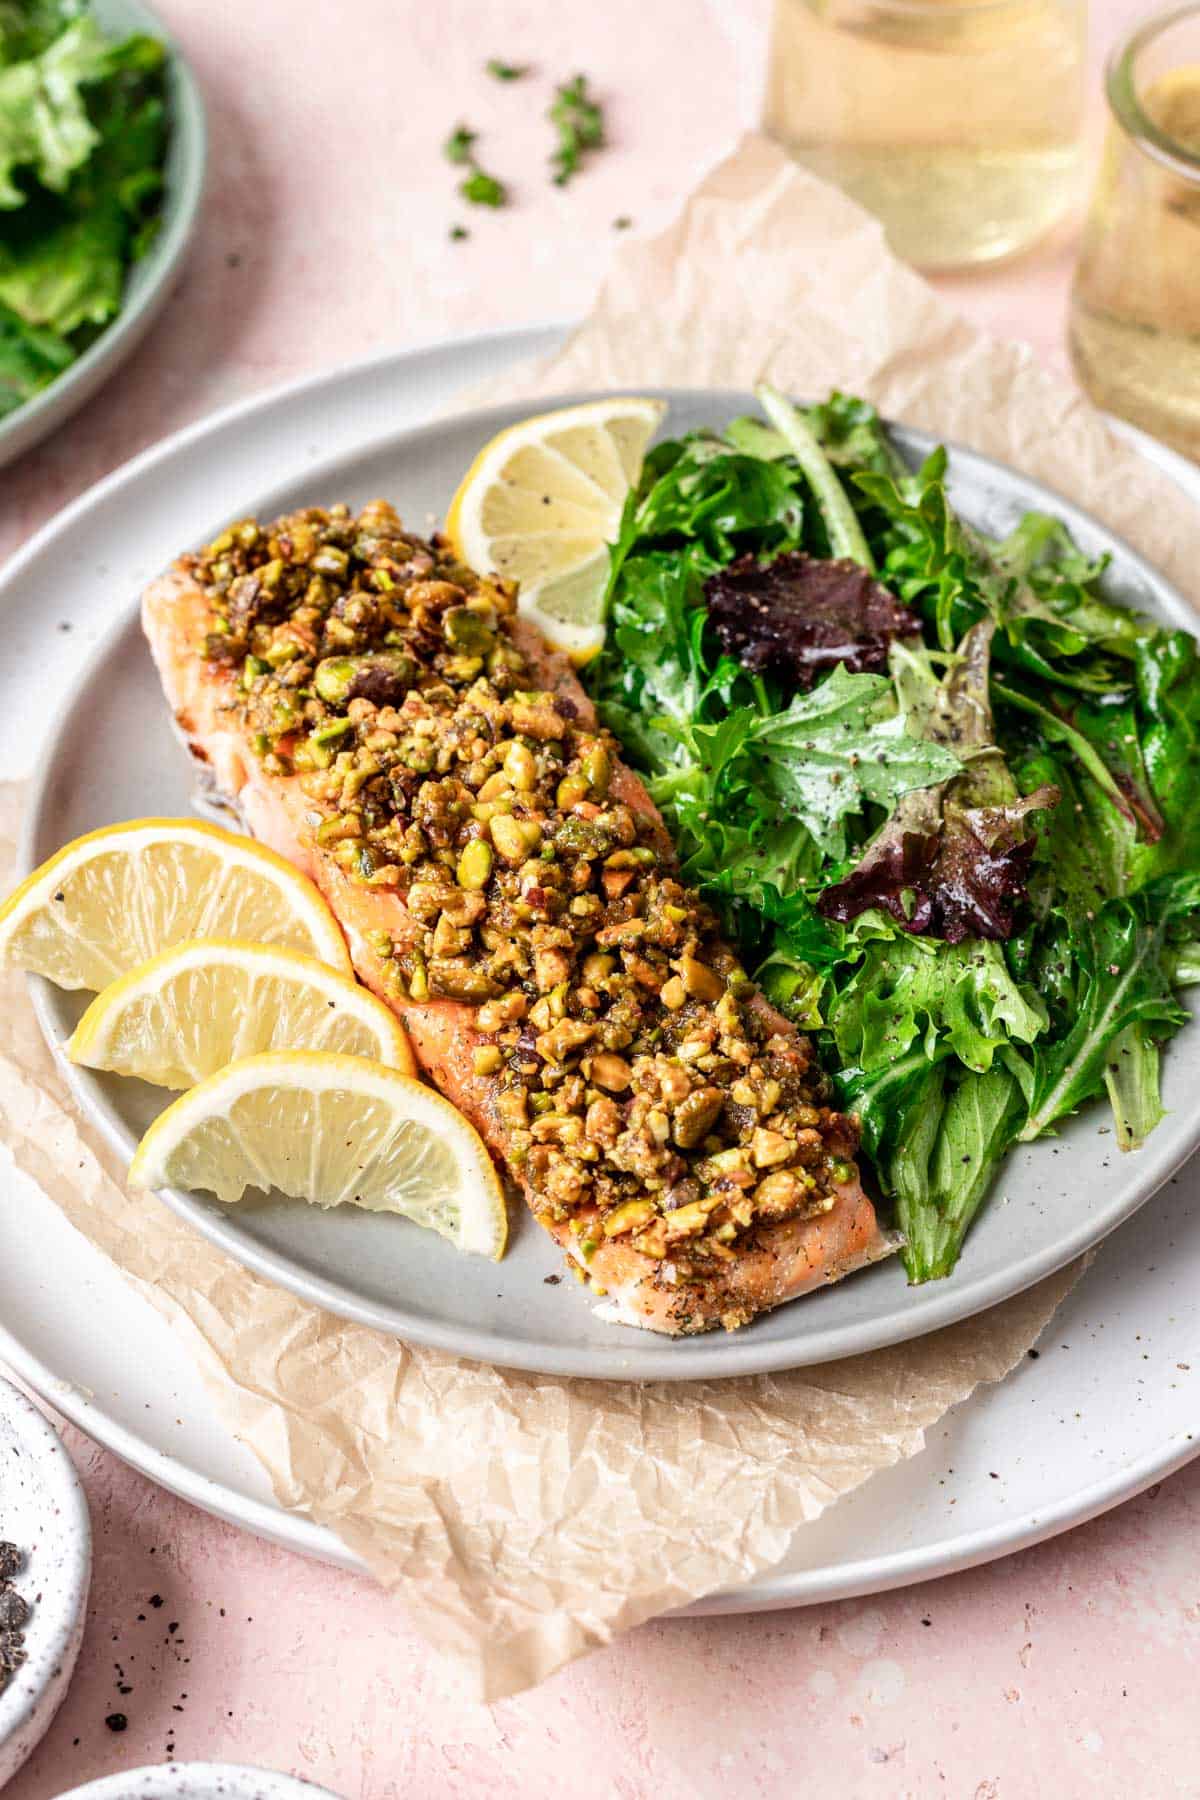 A filet of pistachio crusted salmon on a plate with a side salad and lemon wedges.